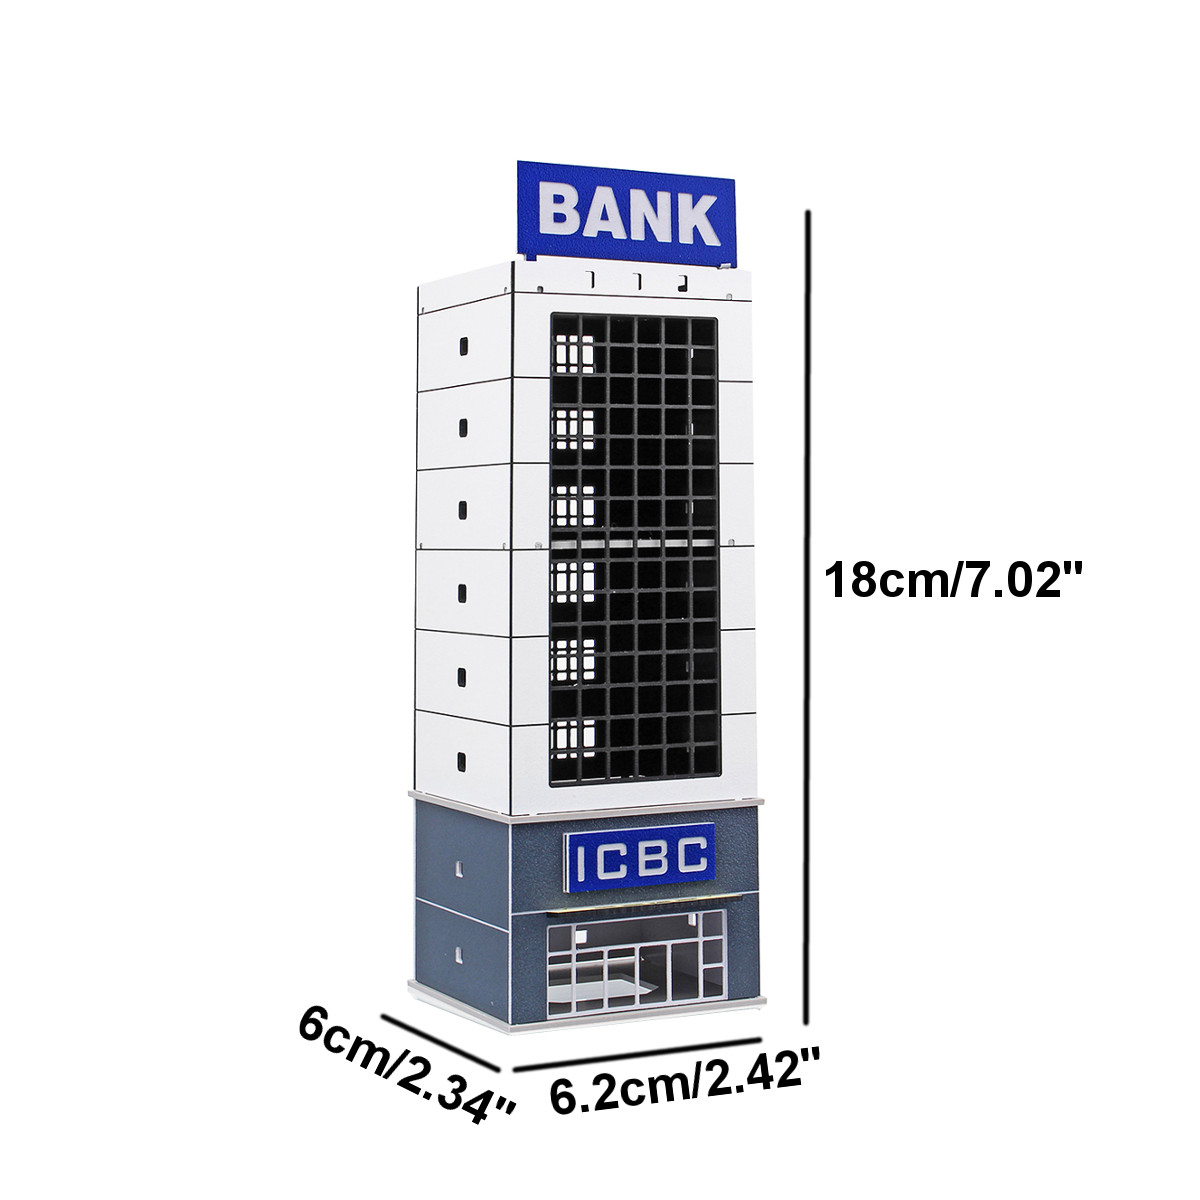 1150-Outland-Modern-Building-Model--Bank-N-Scale-for-GUNDAM-Gifts-1393015-10